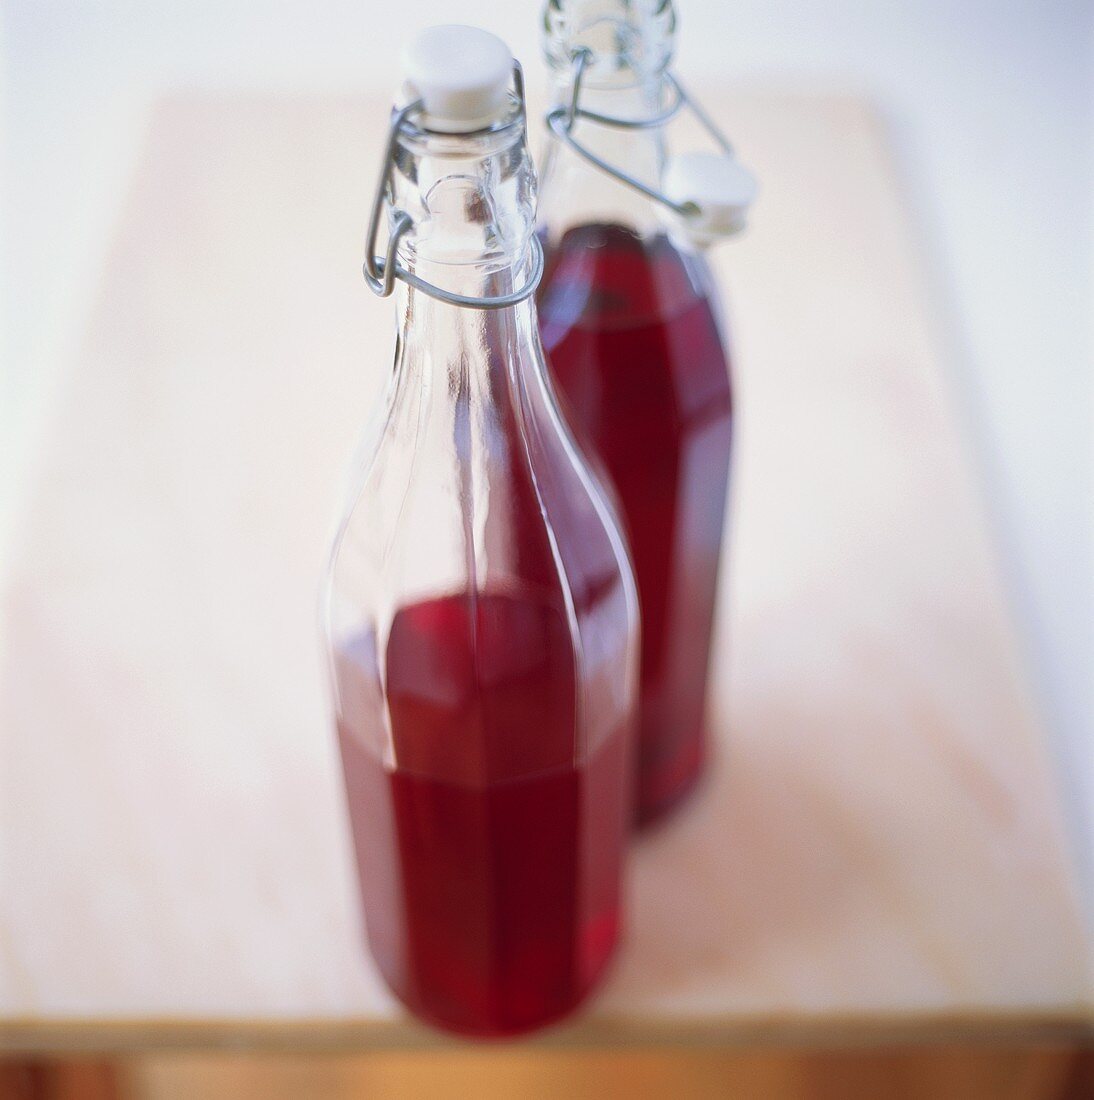 Raspberry syrup in bottles